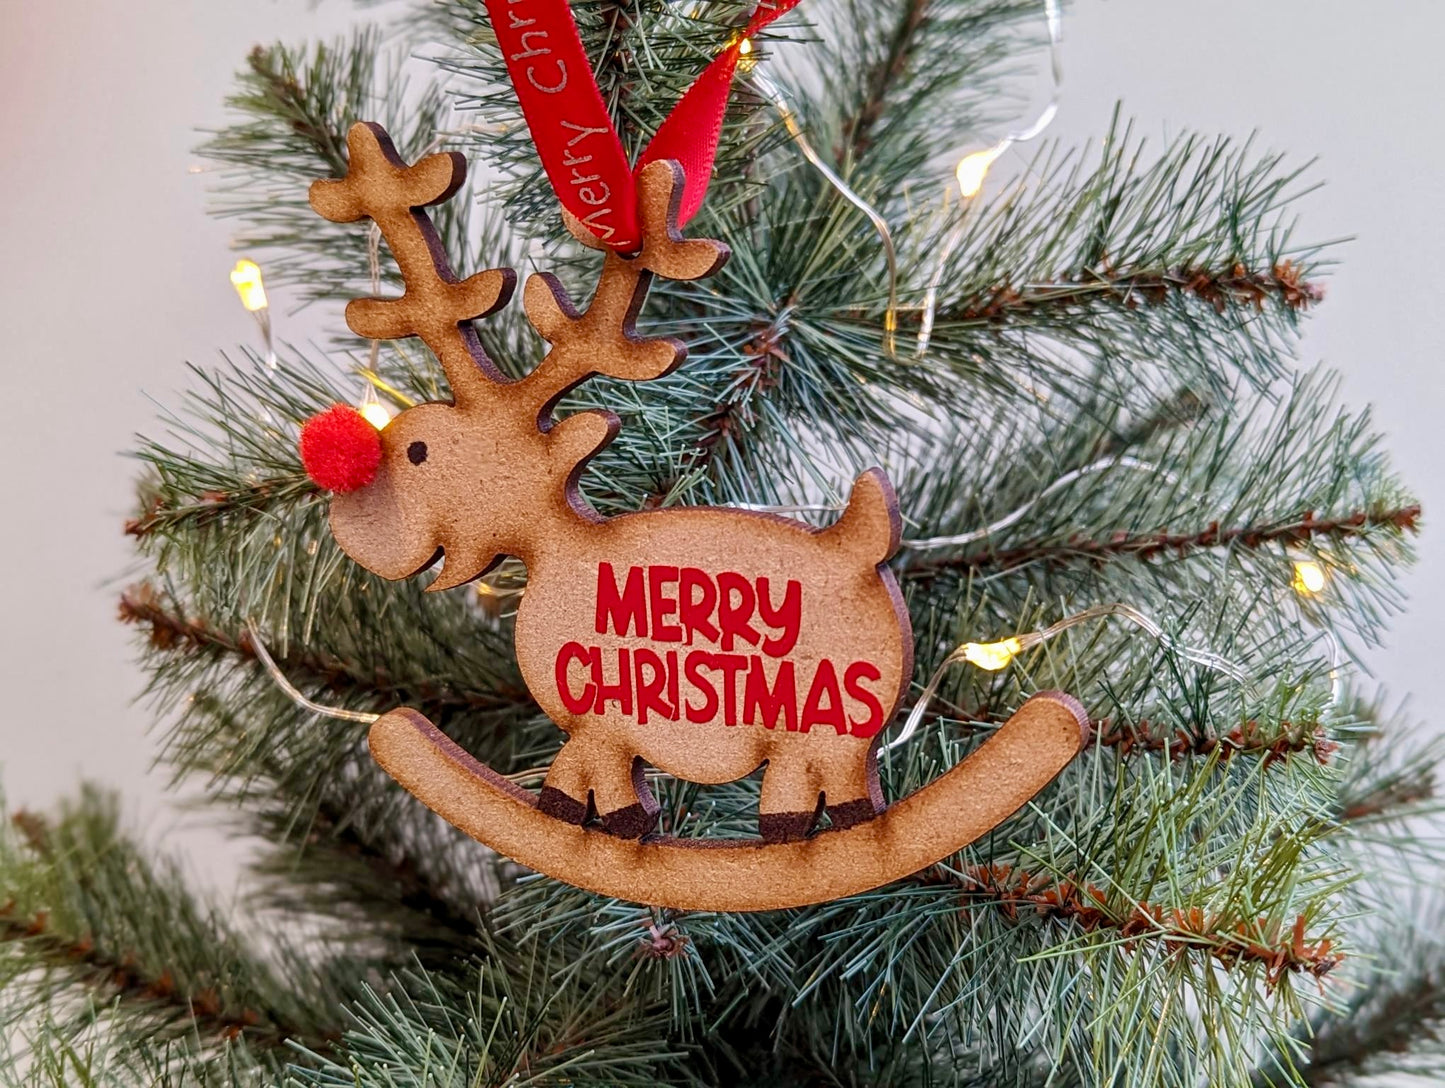 Rudolph the red-nosed reindeer Christmas decoration